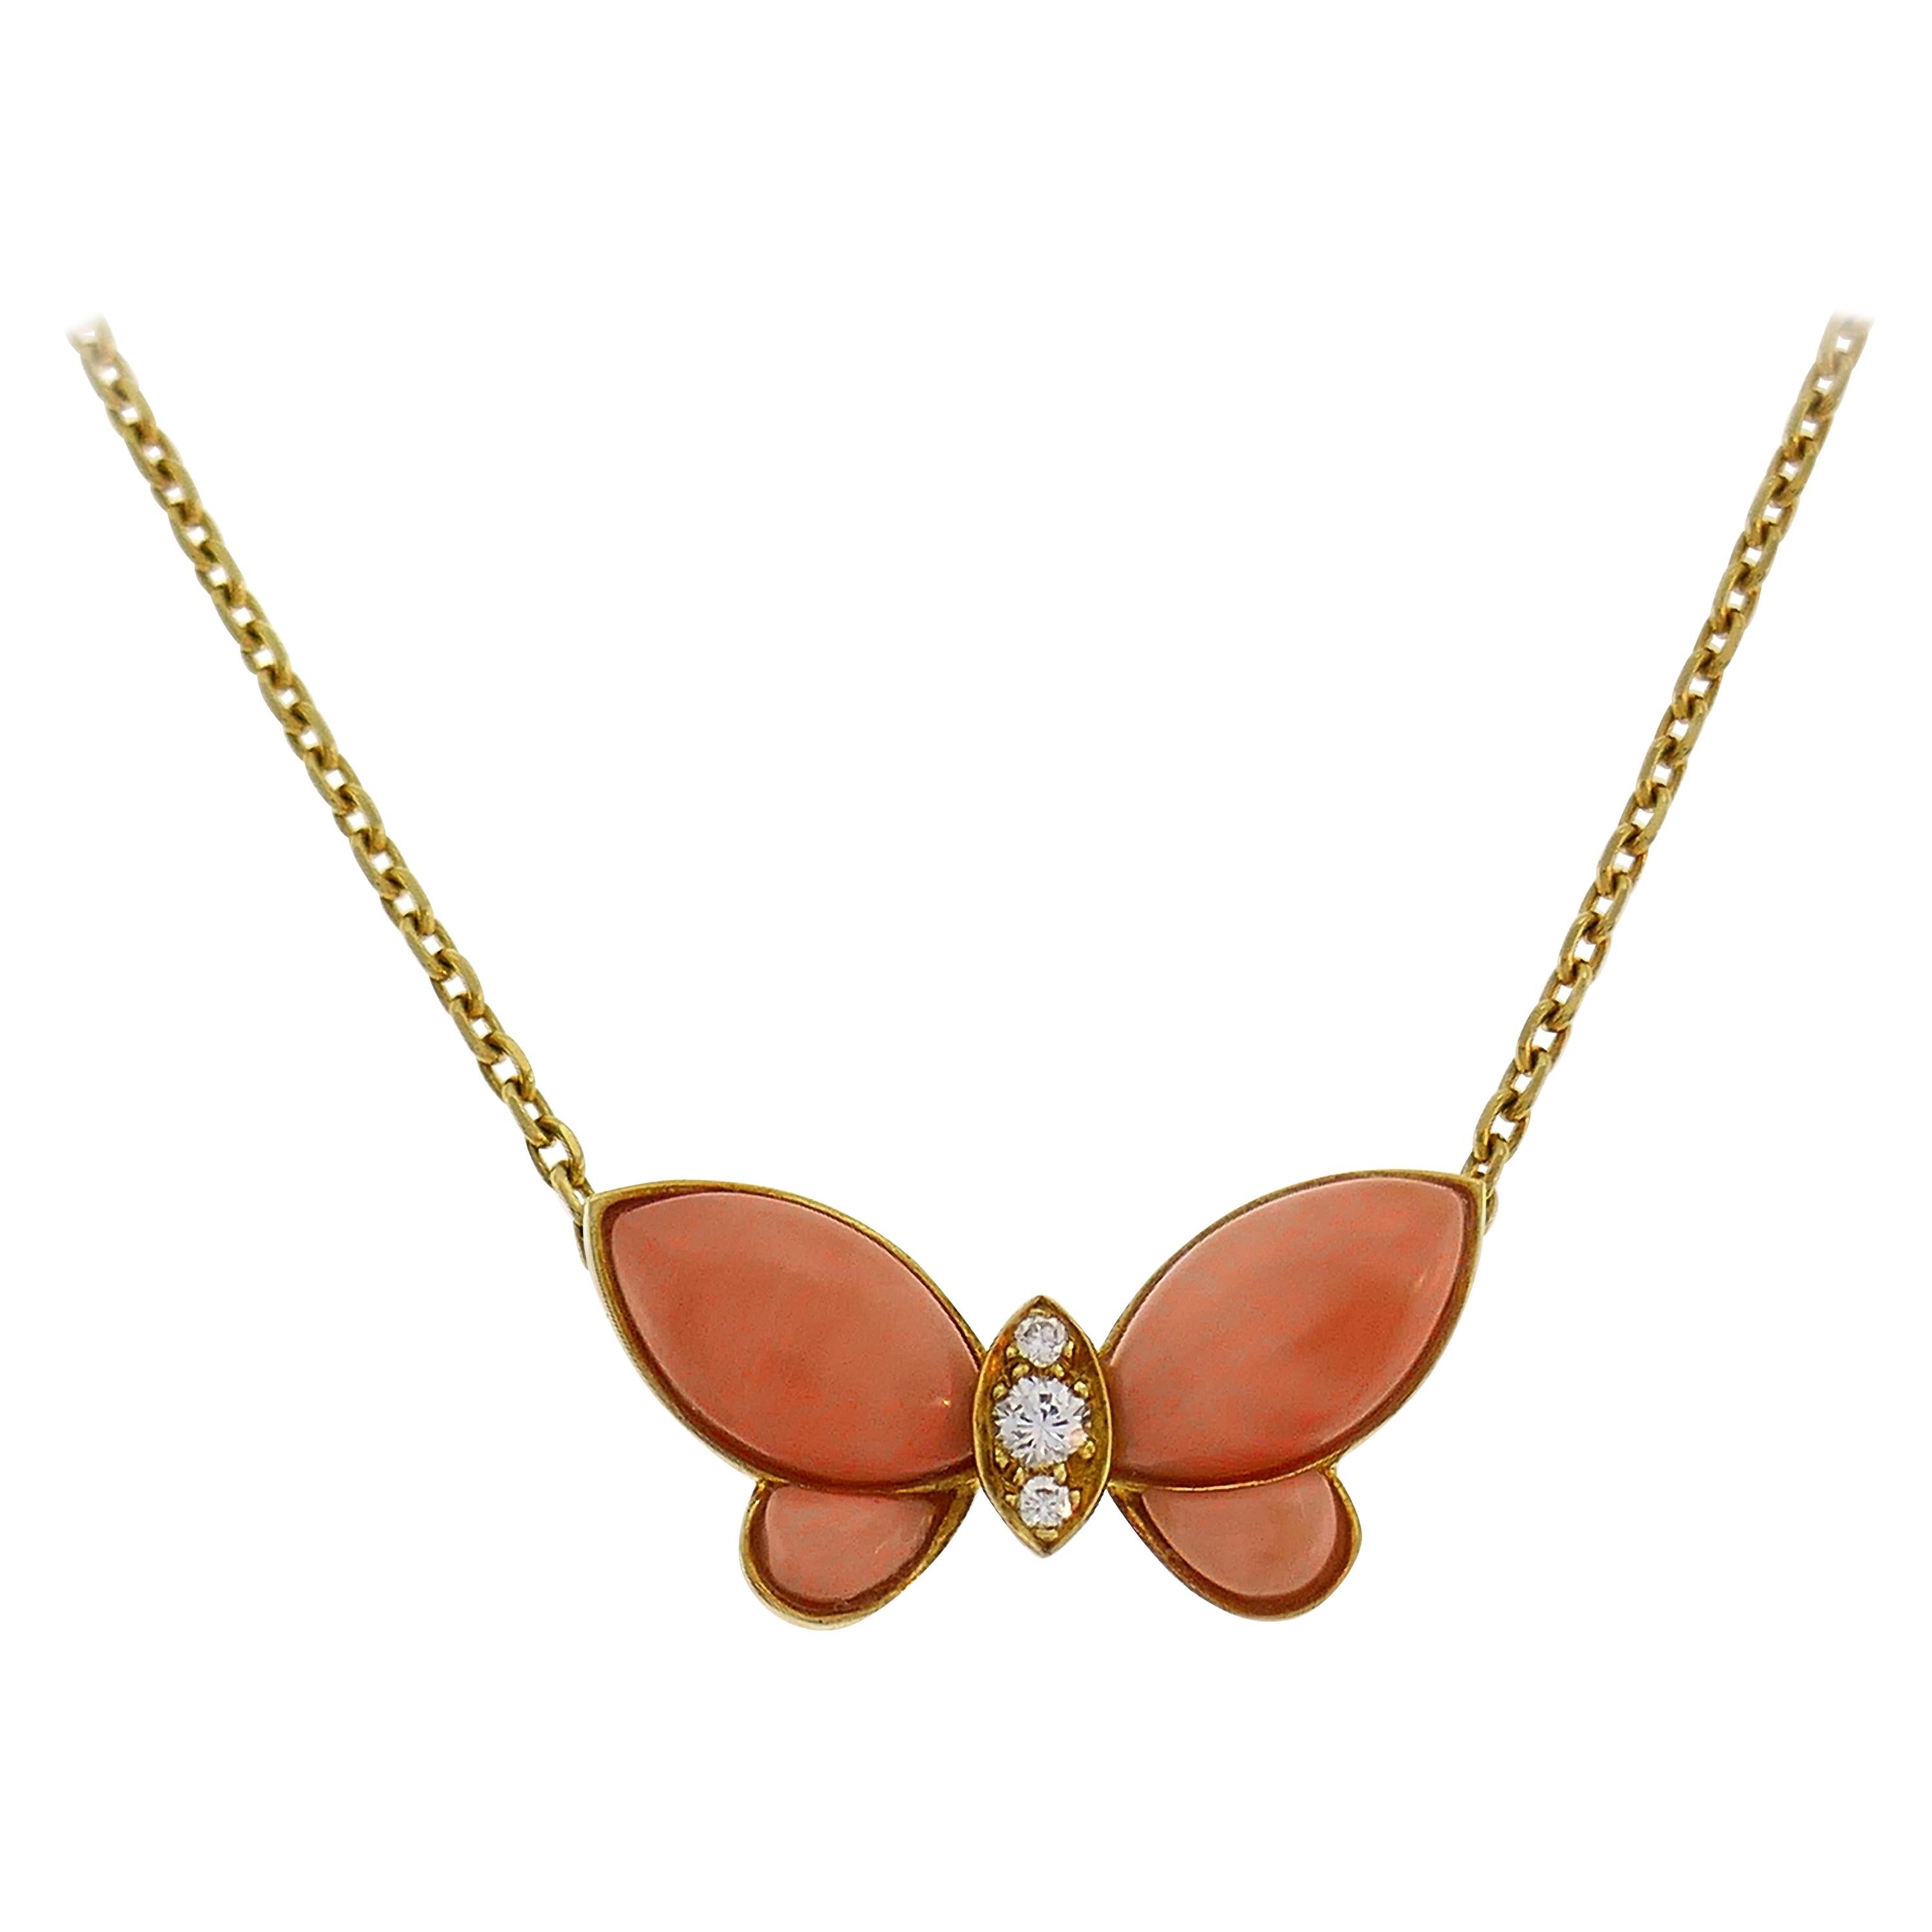 Van Cleef & Arpels Butterfly Pendant Necklace in Yellow Gold Diamond Coral